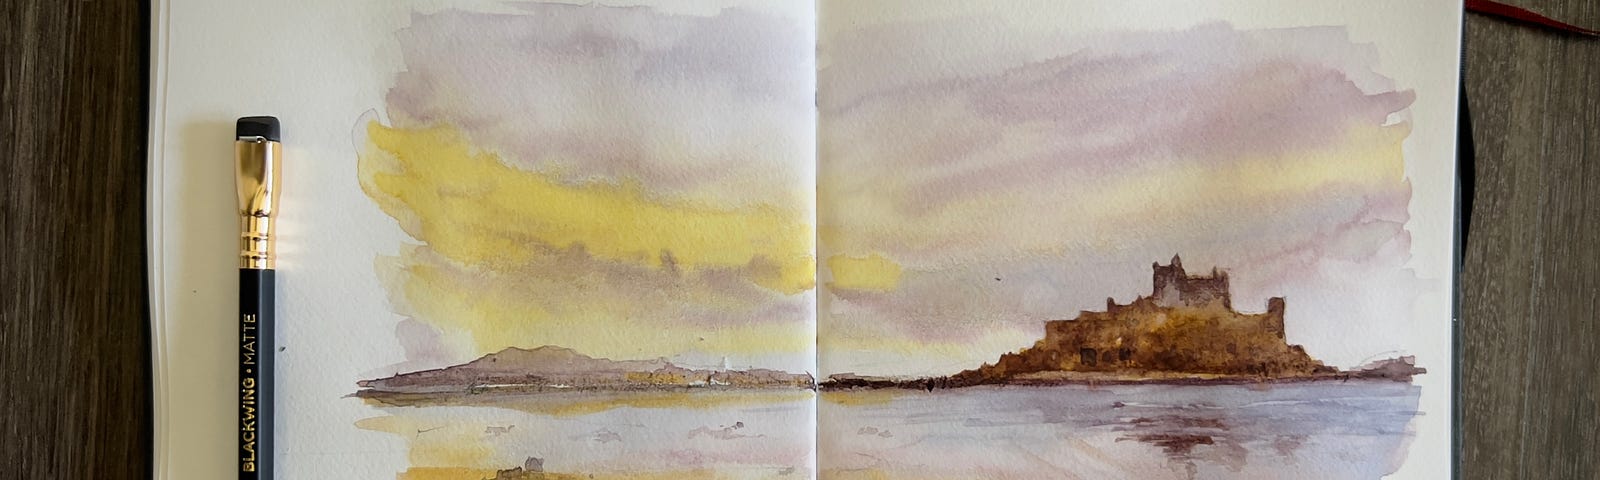 Watercolour painting of St Michael’s Mount, Cornwall